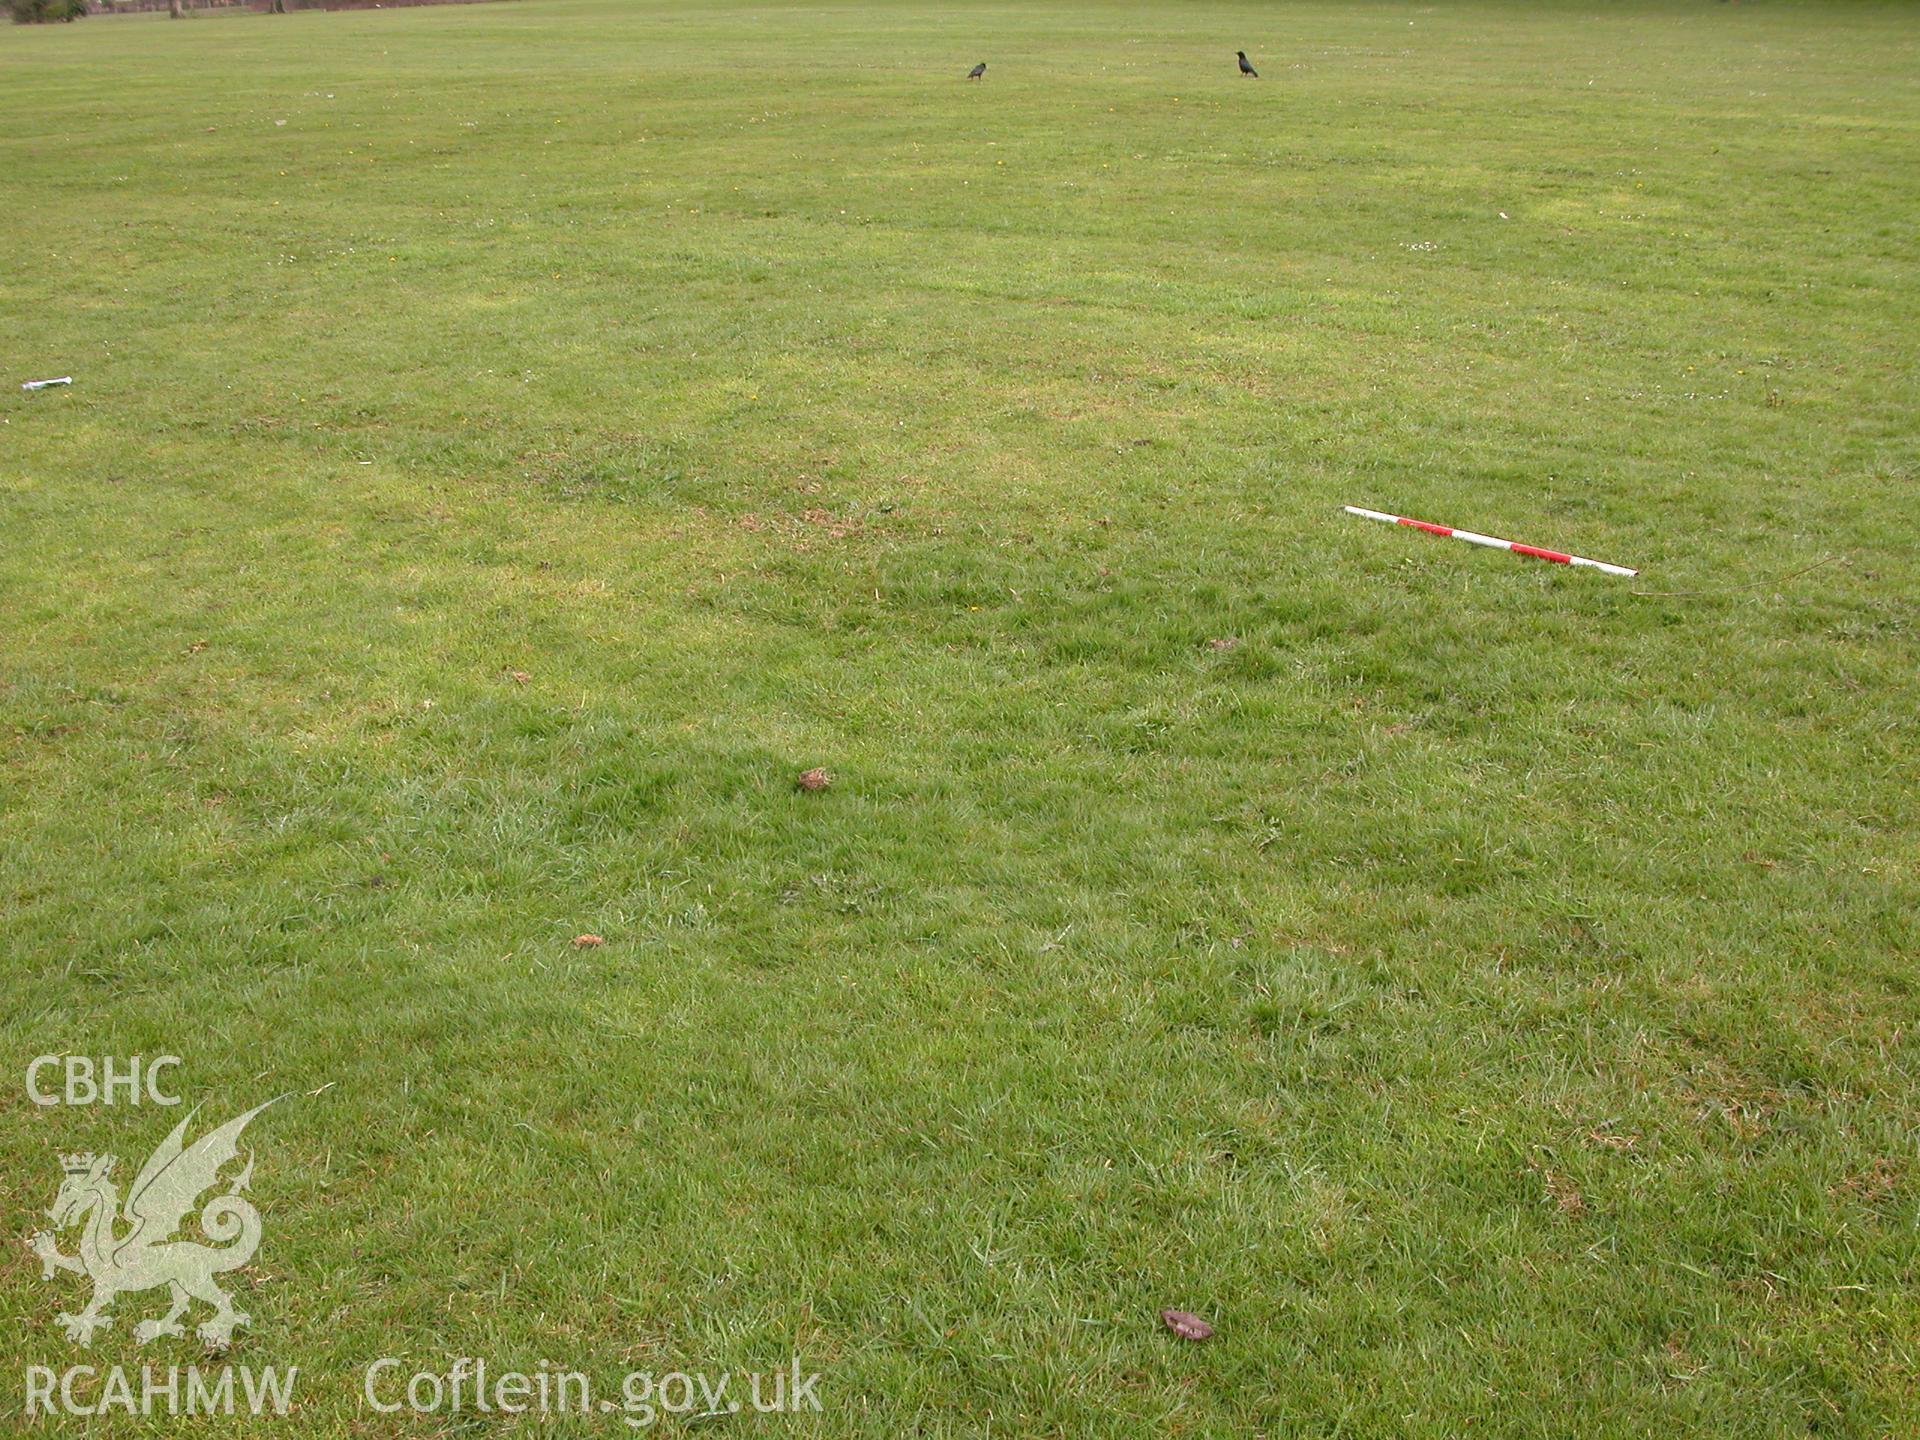 Digital photograph of part of the assessment area, taken from an archaeological impact assessment and field walkover of Pontcanna Fields in Cardiff.